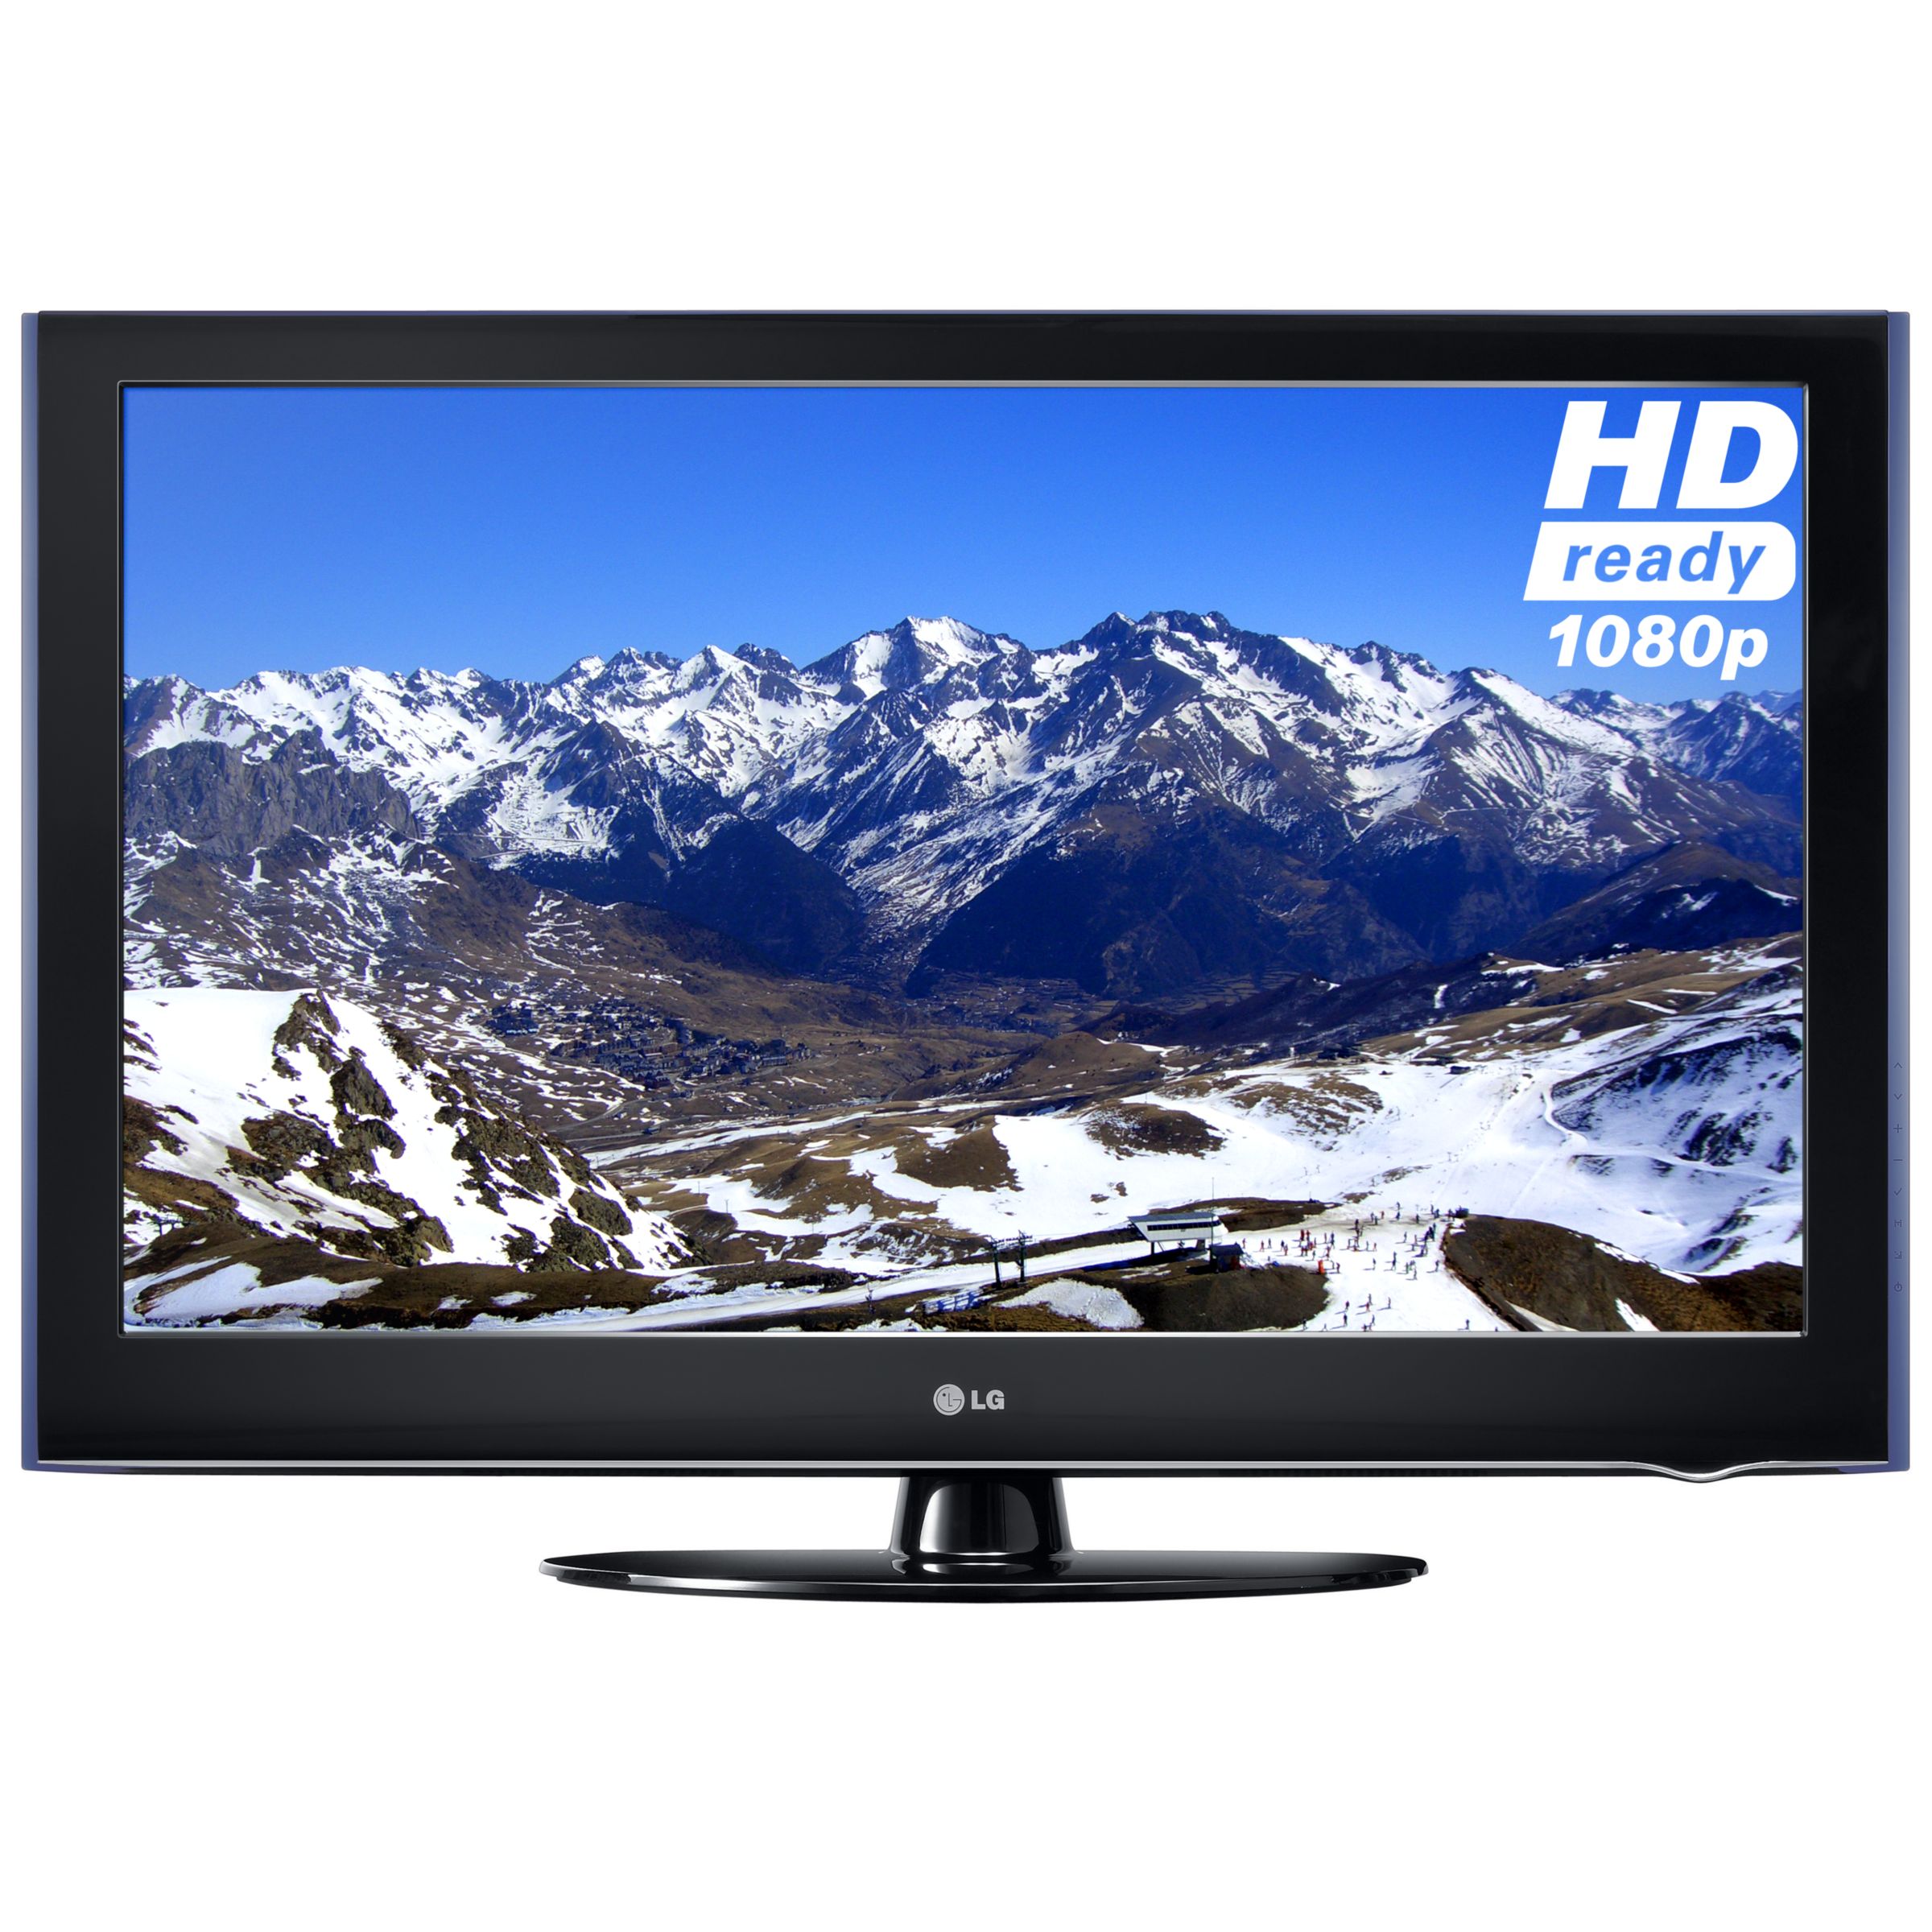 LG 47LD950 LCD HD 1080p 3D Digital Television, 47 Inch with Built-in Freeview HD at John Lewis